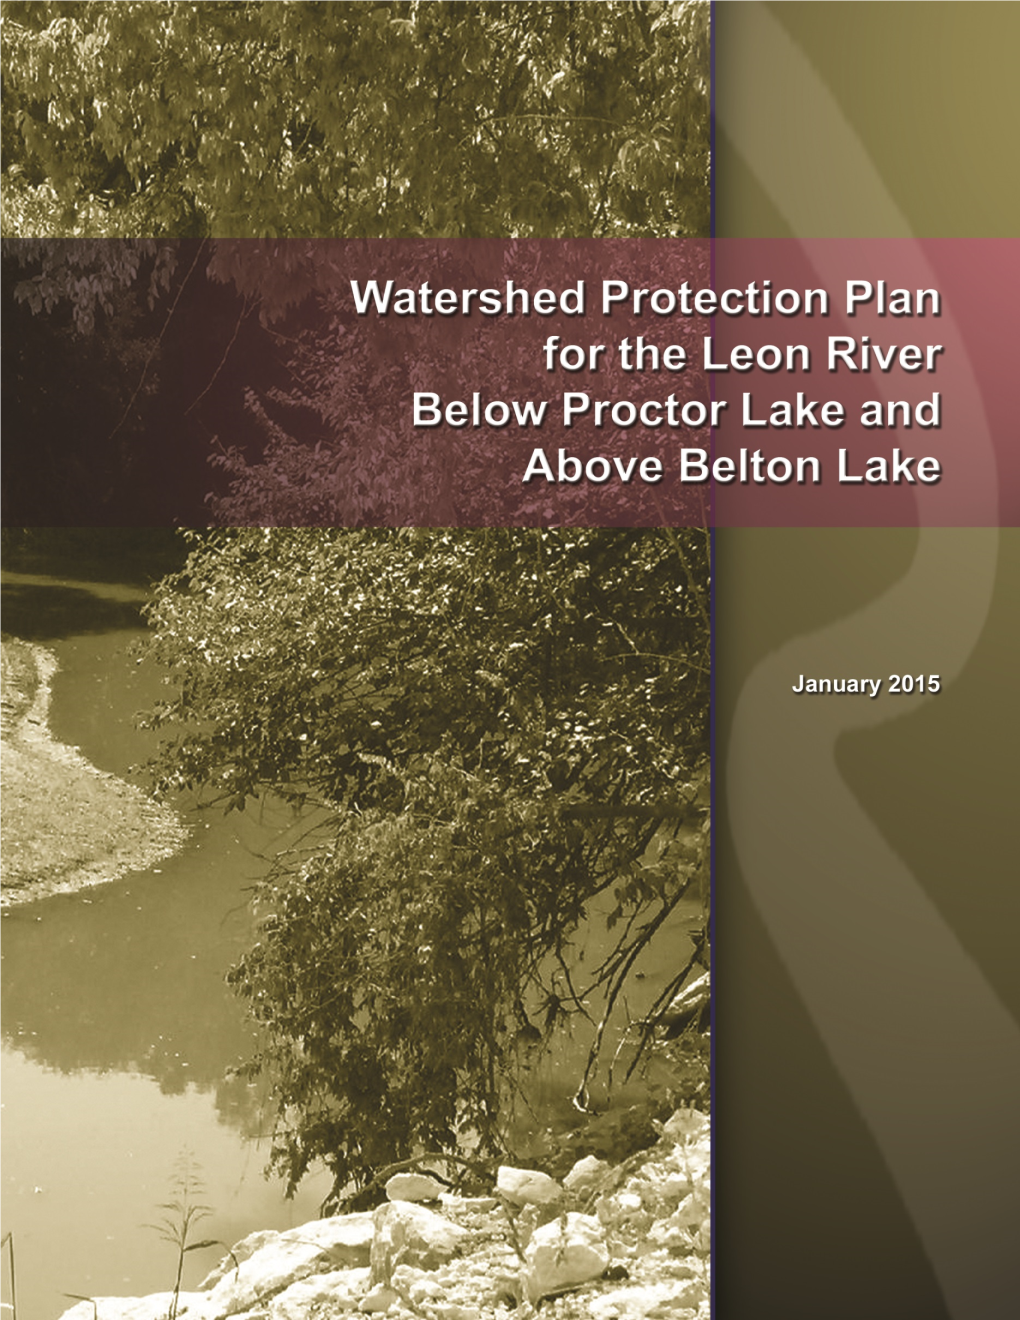 Watershed Protection Plan for the Leon River Below Proctor Lake and Above Belton Lake